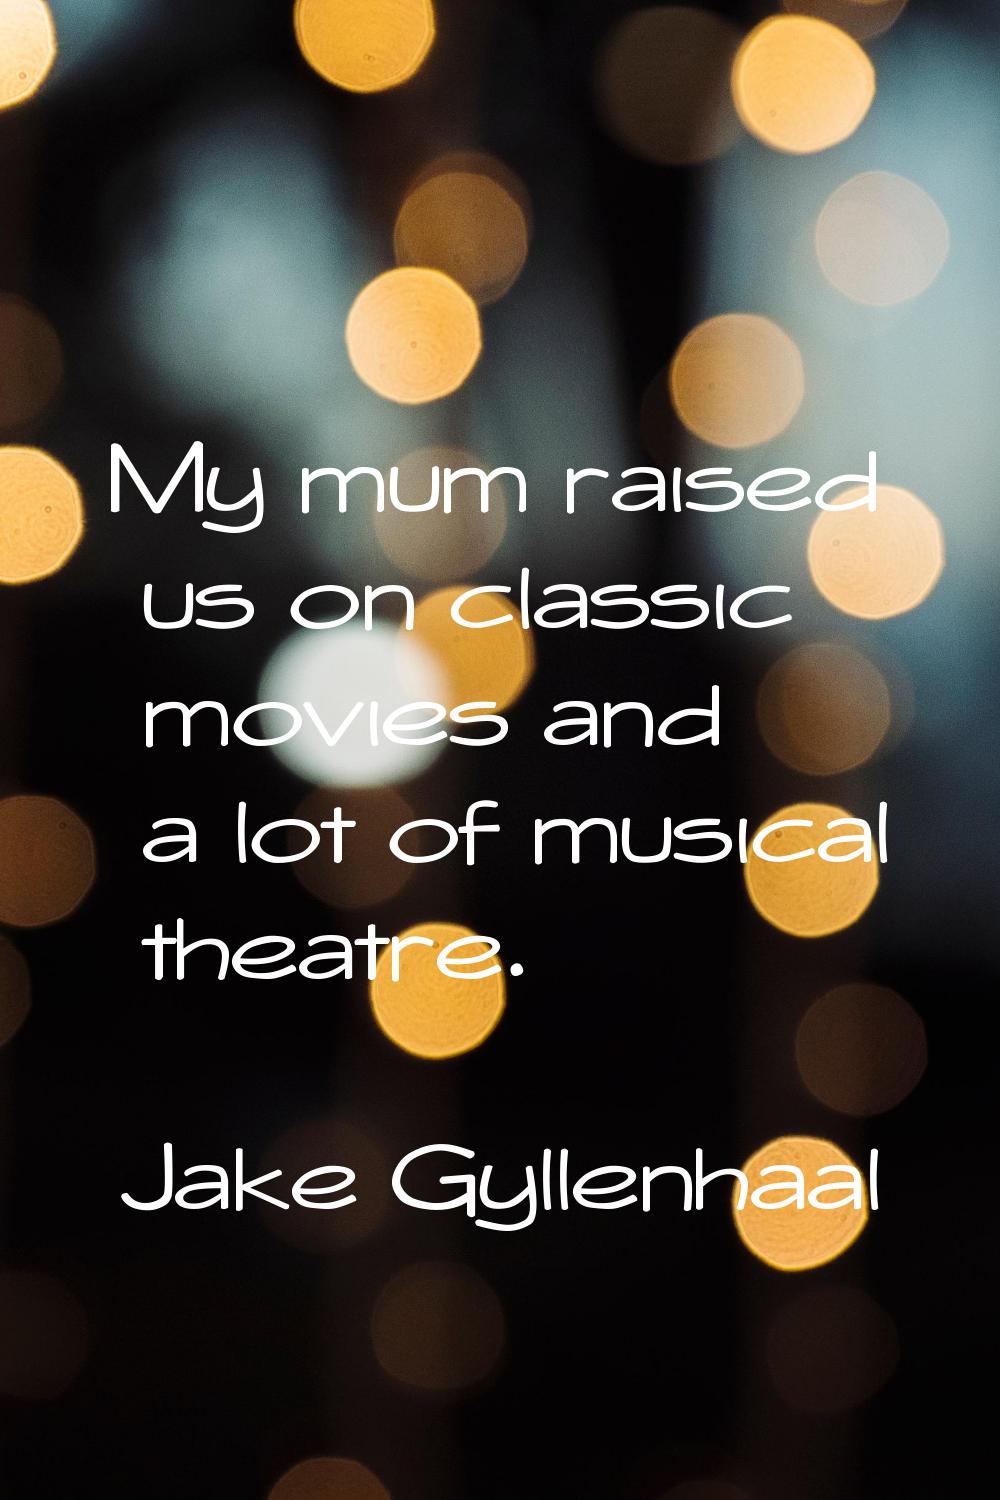 My mum raised us on classic movies and a lot of musical theatre.